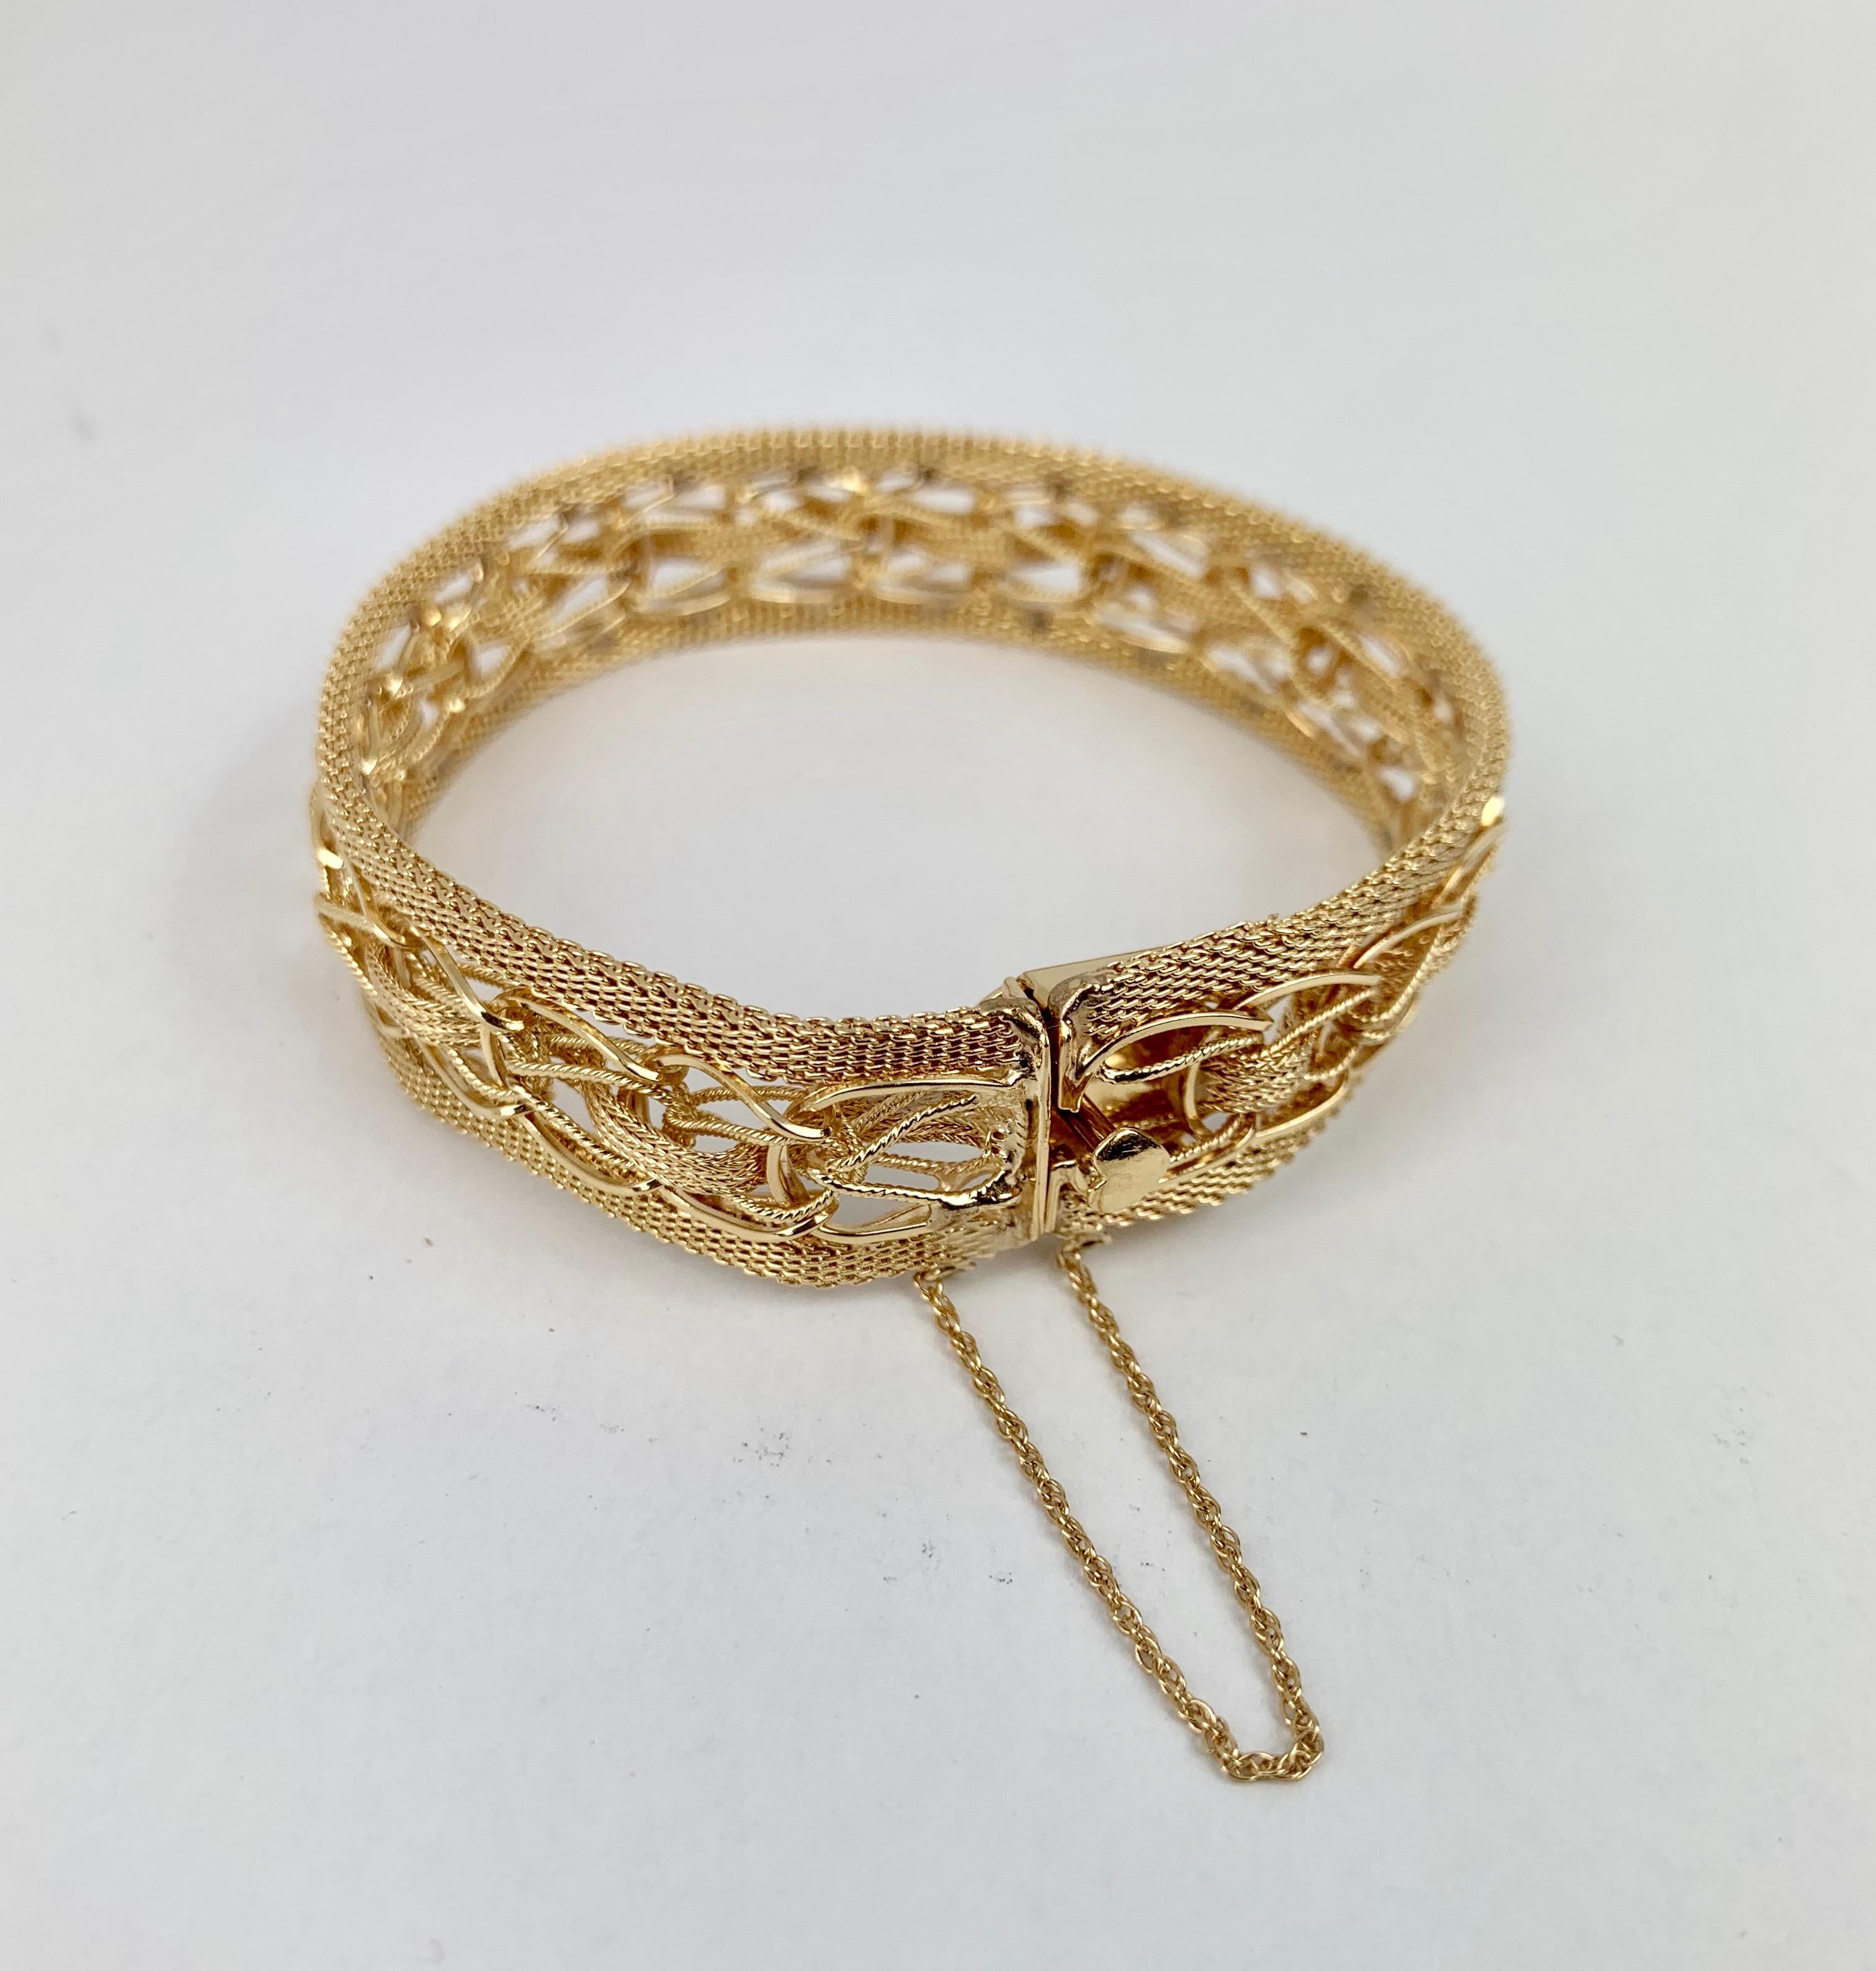 Women's Gold Mesh Bracelet with a Heart Shaped Thumb Latch-14 karat y.g.  For Sale